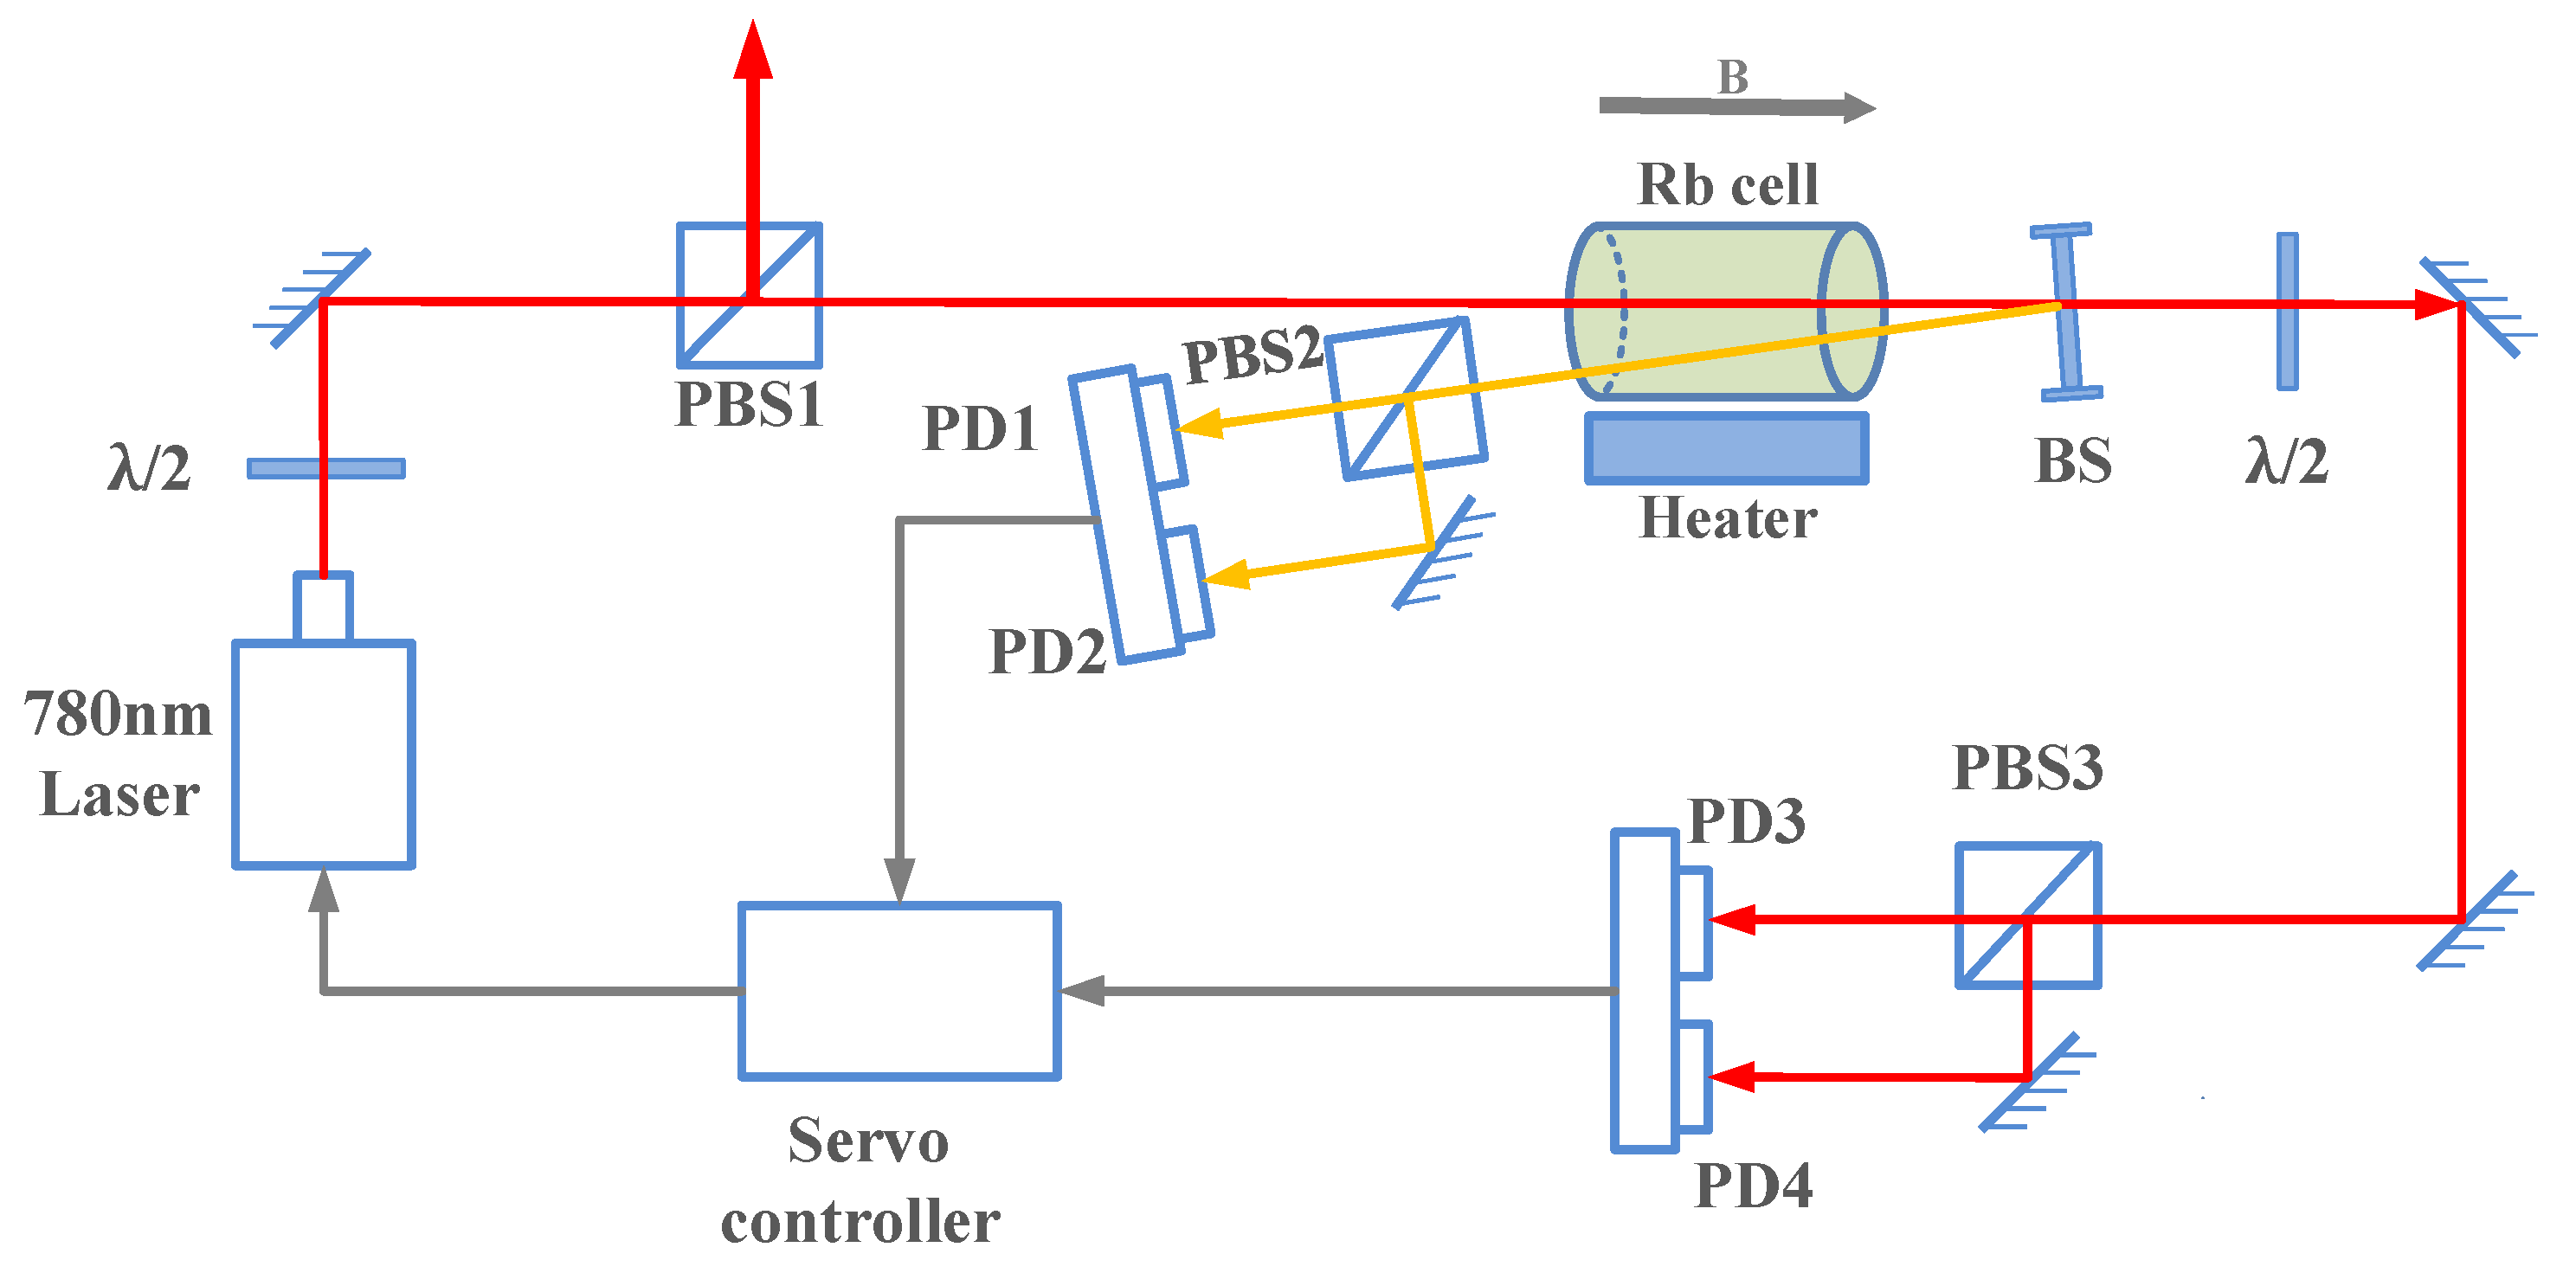 FRS concept using an Nd:YAG laser and molecular iodine filter